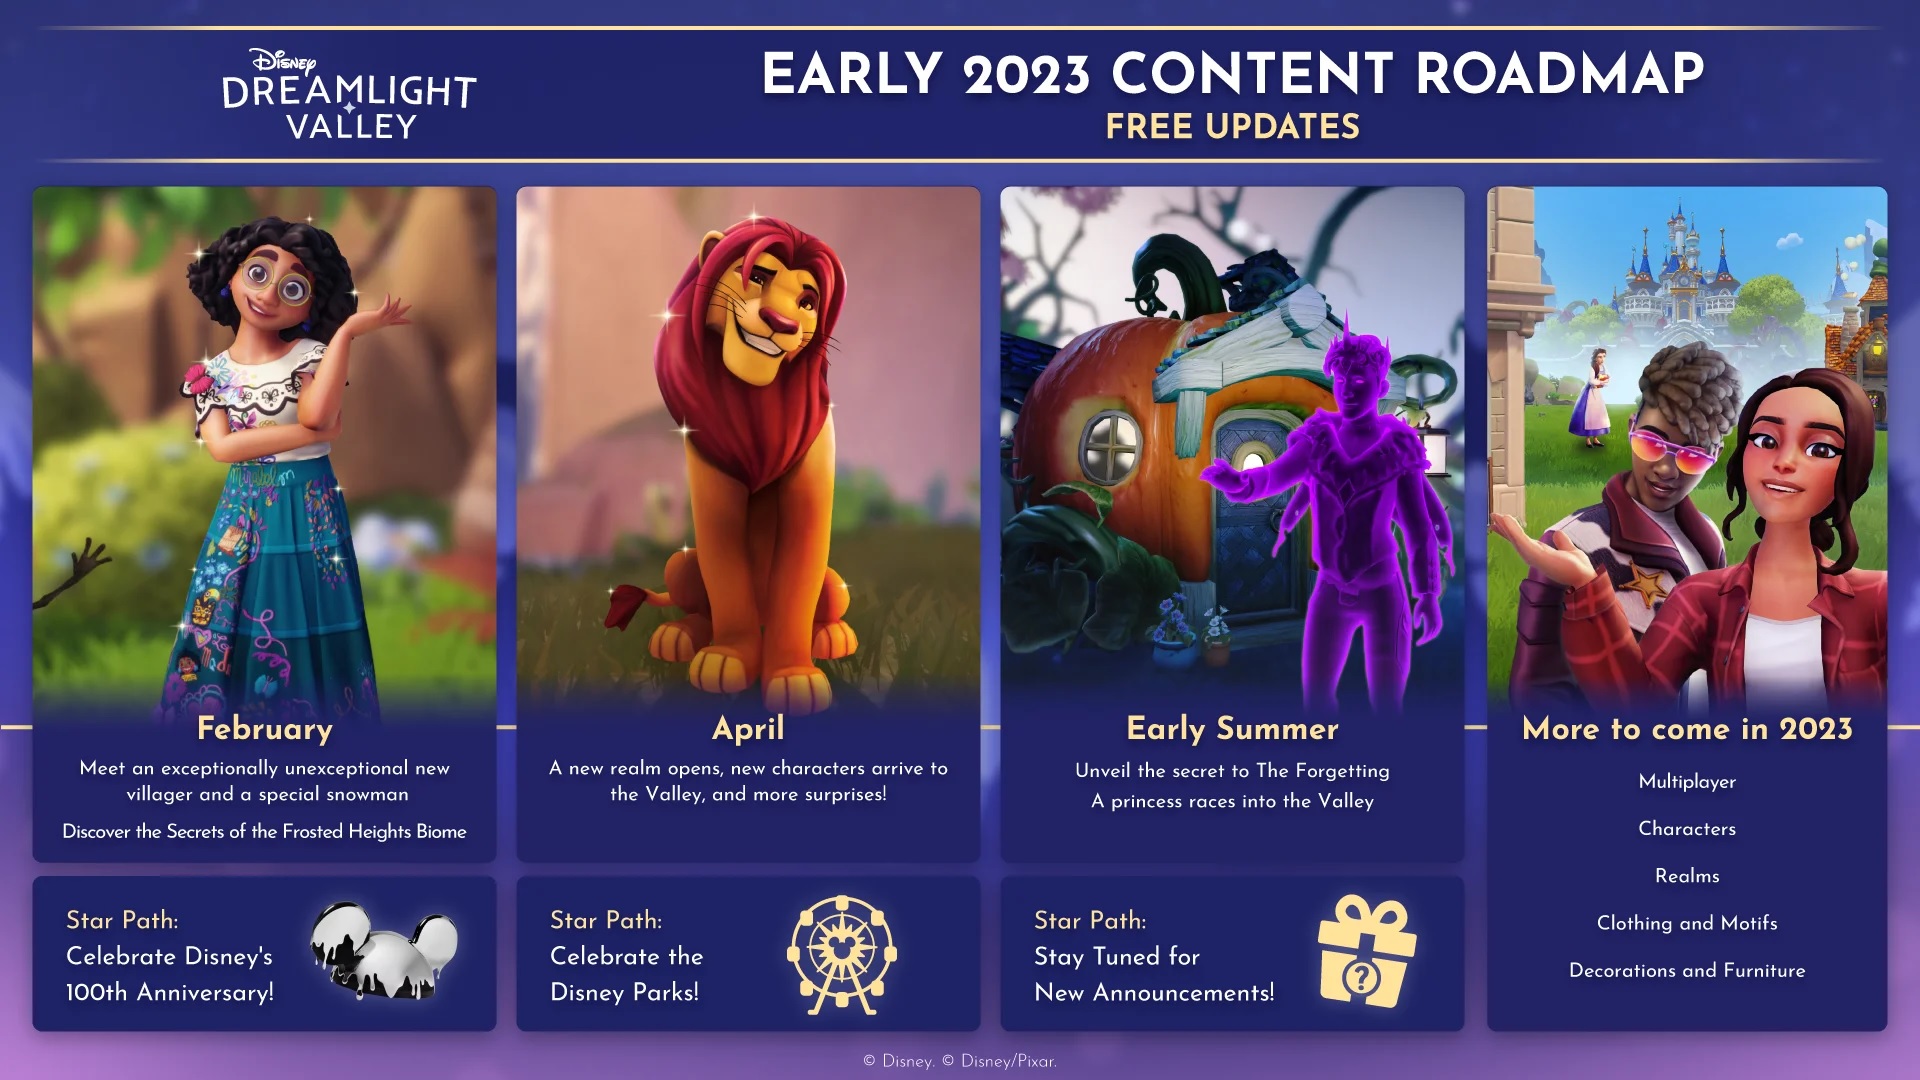 Disney Dreamlight Valley official 2023 roadmap including a February update showing Mirabel, an April update with Simba, a summer update, and multiplayer listed as 